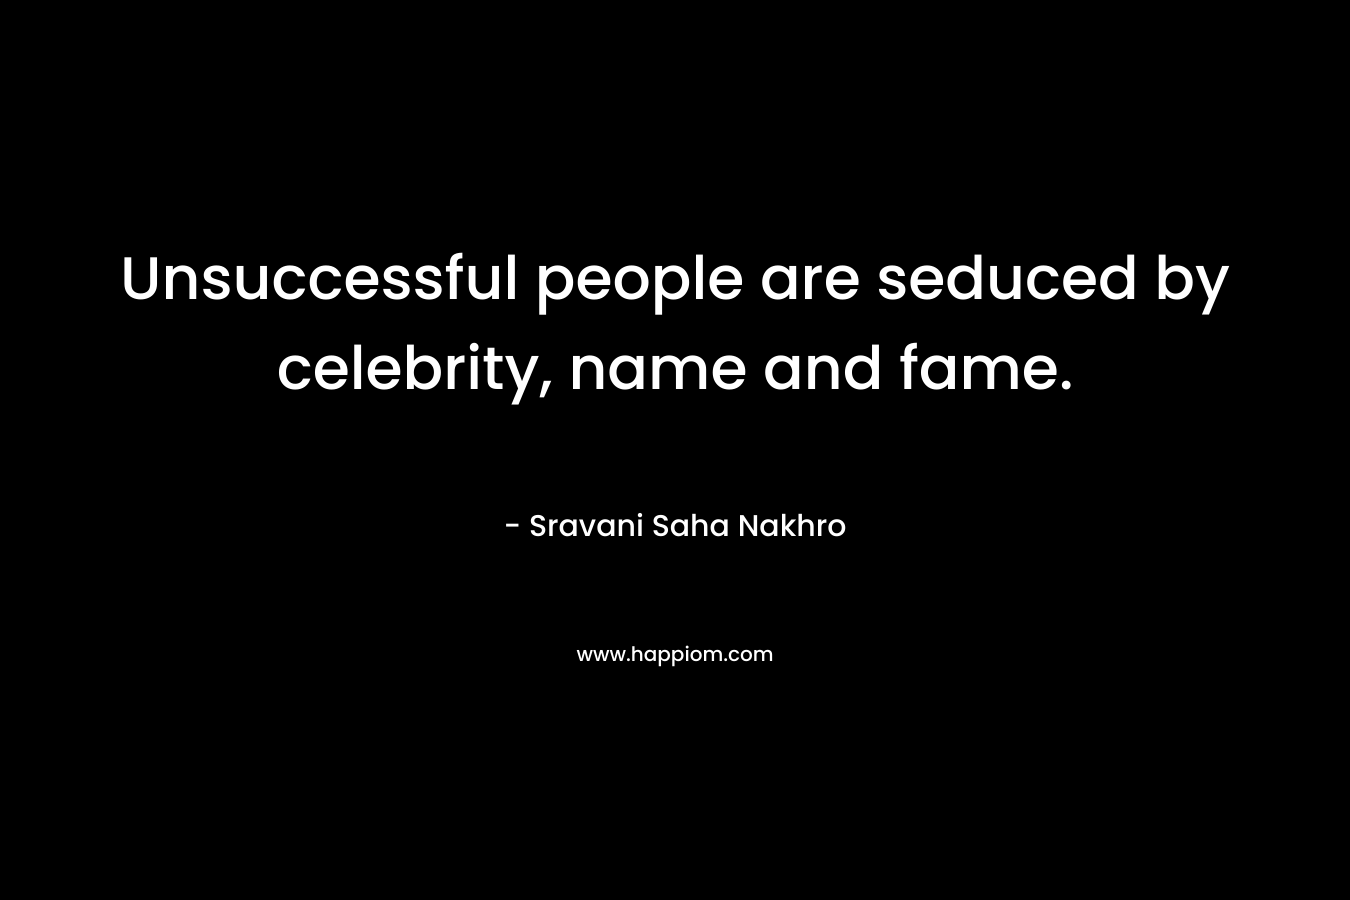 Unsuccessful people are seduced by celebrity, name and fame.